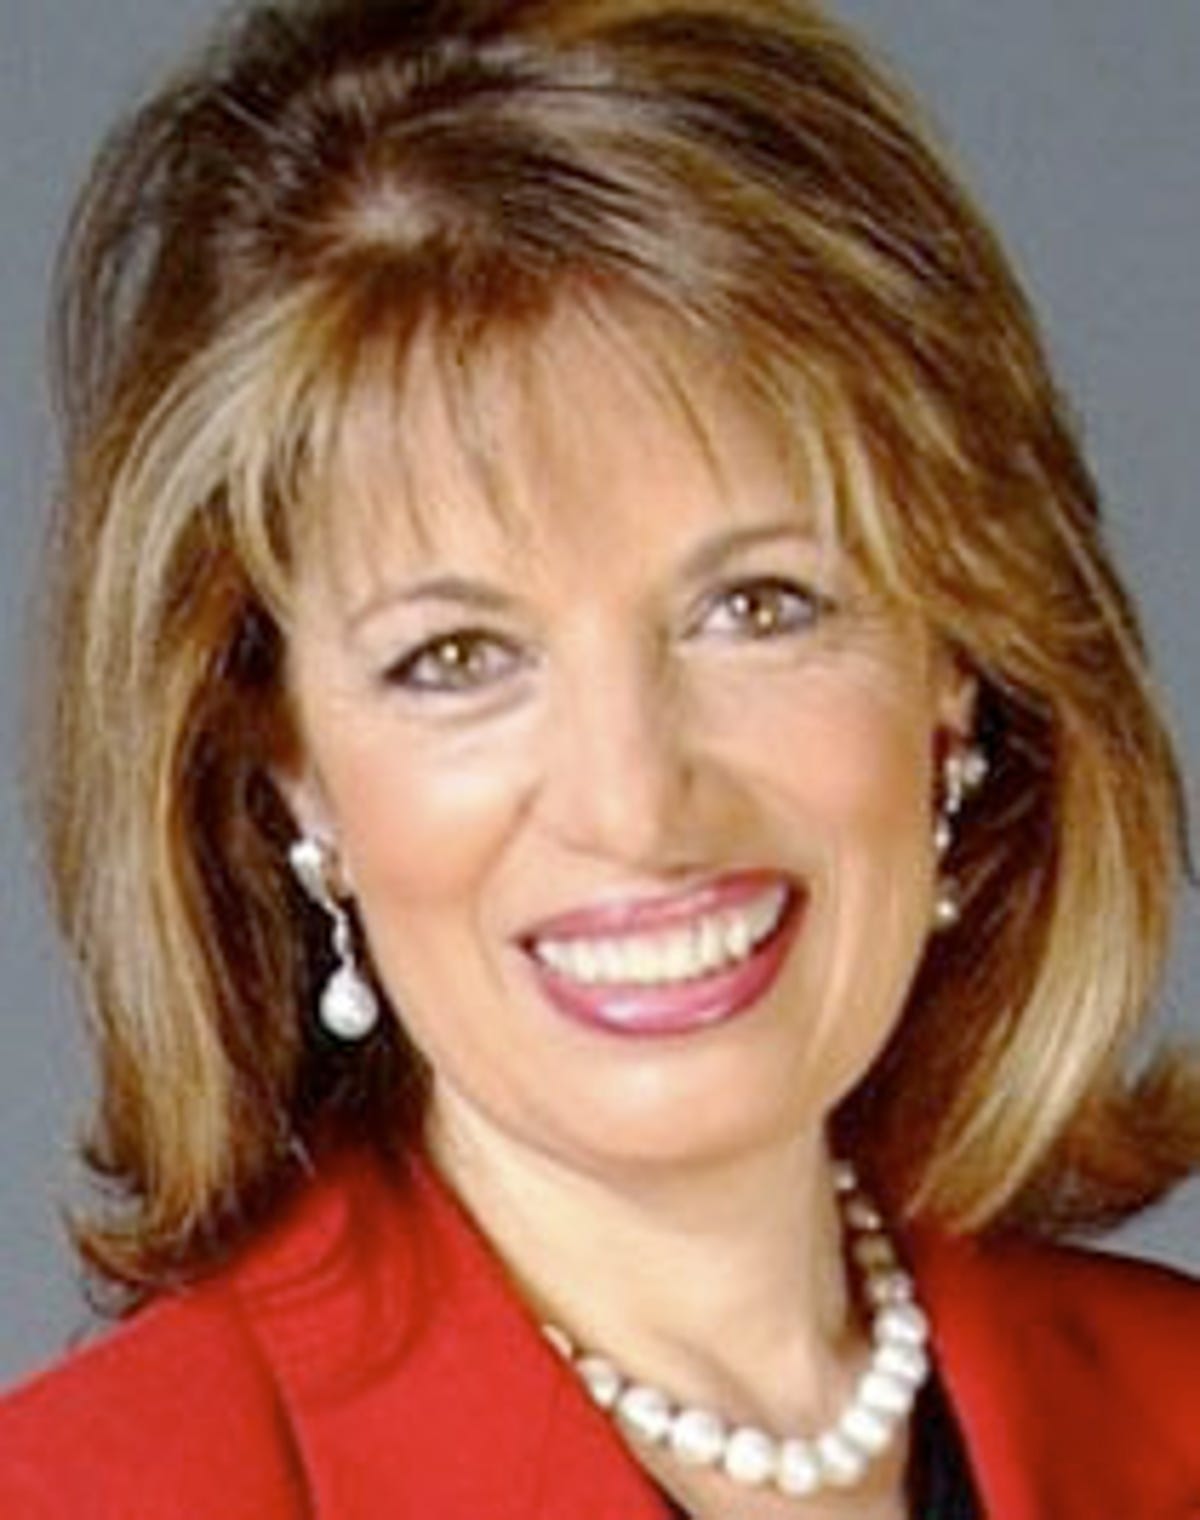 Rep. Jackie Speier, a Democrat whose district includes YouTube's San Bruno, Calif., headquarters, co-authored a letter asking Google a series of sternly worded questions.